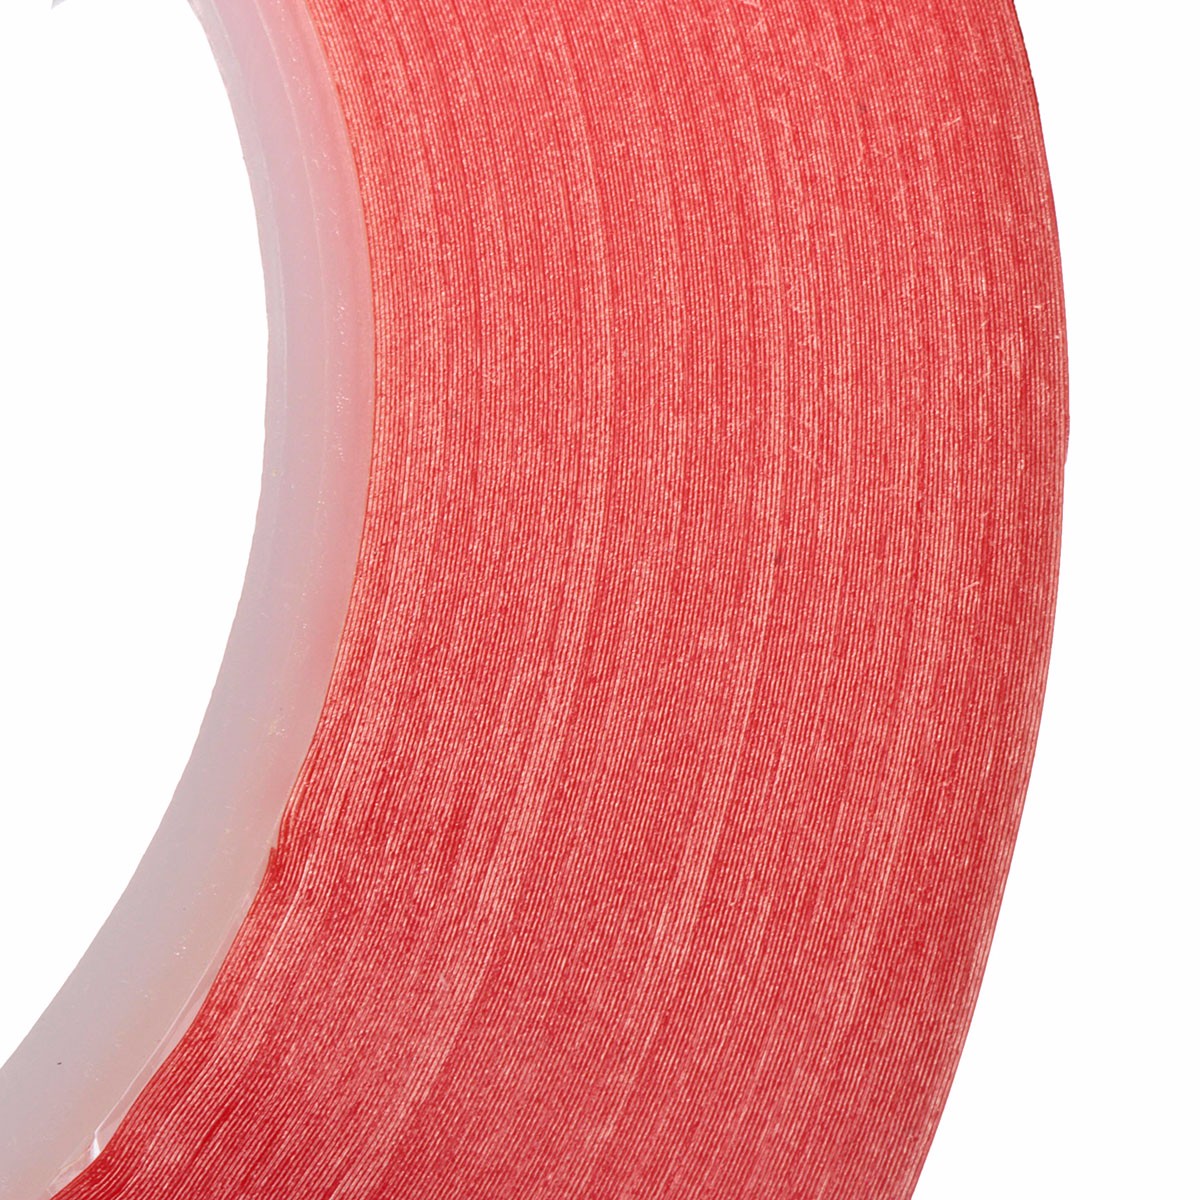 2mm-Adhesive-Double-Side-Tape-Strong-Sticky-For-Samsung-for-iPhone-Cell-Phone-Repair-1010750-4